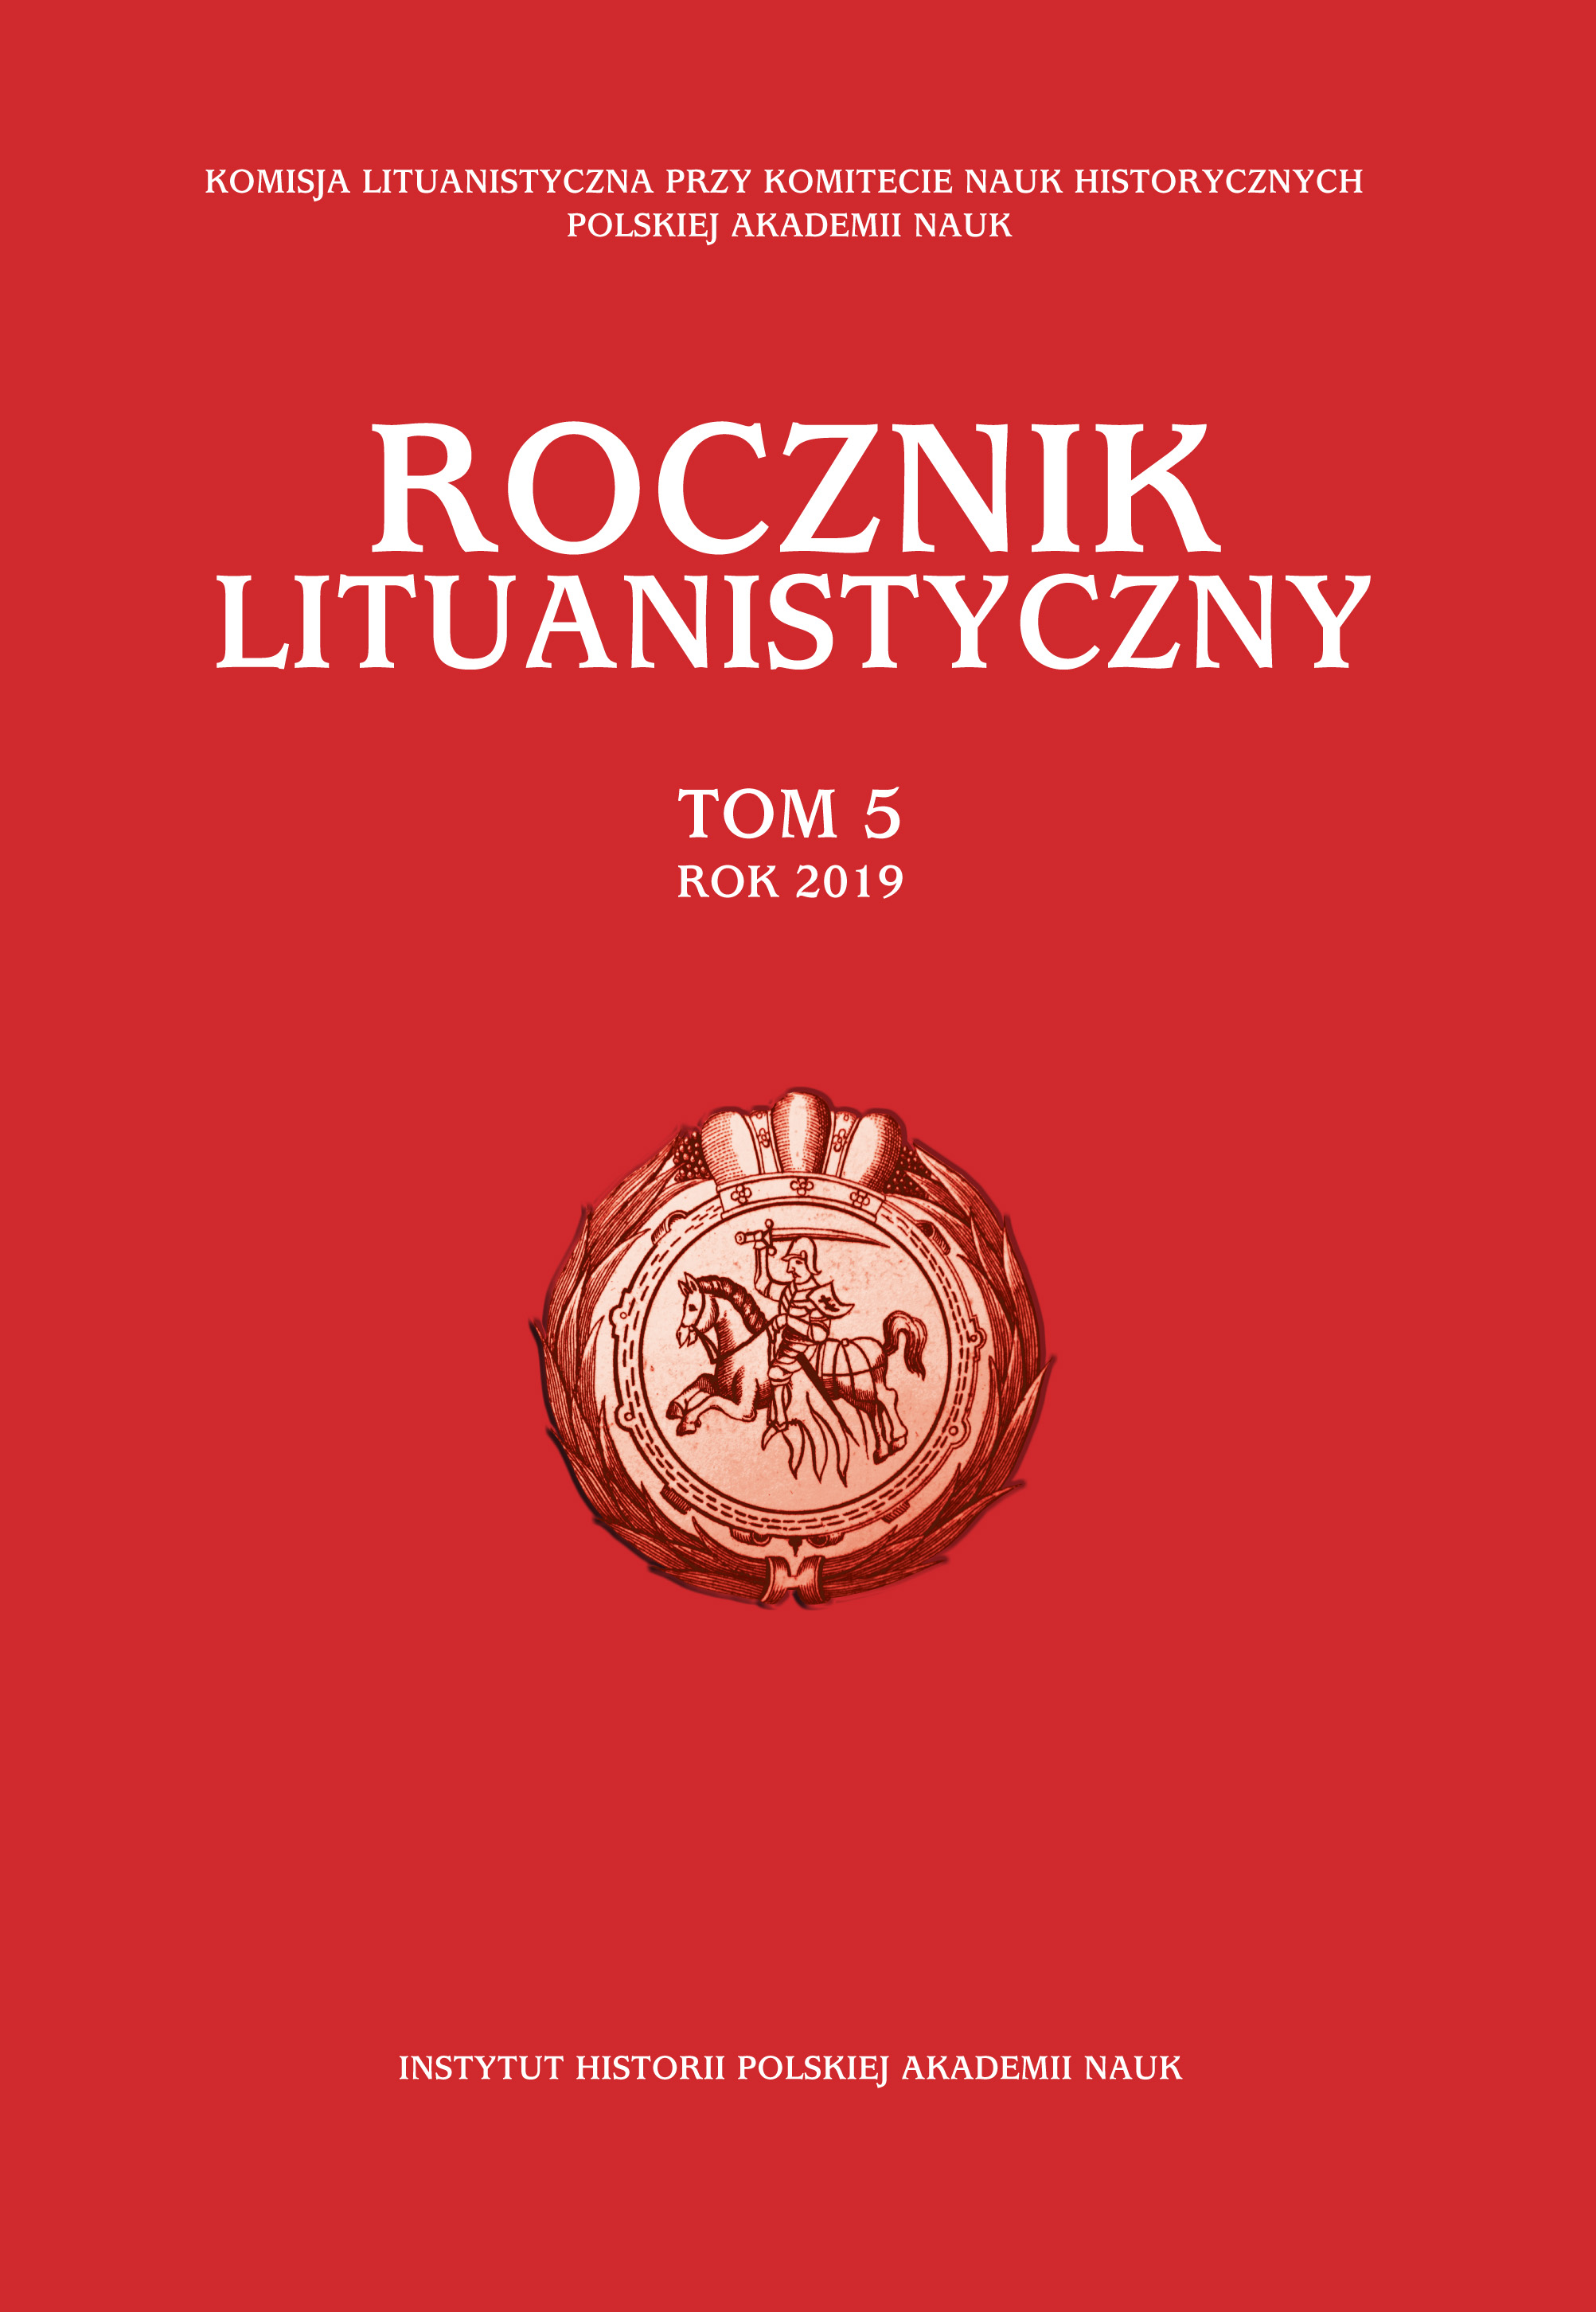 Costs of Setting Up a Foreign Infantry Regiment in the Grand Duchy of Lithuania in the First Half of the Seventeenth Century Cover Image